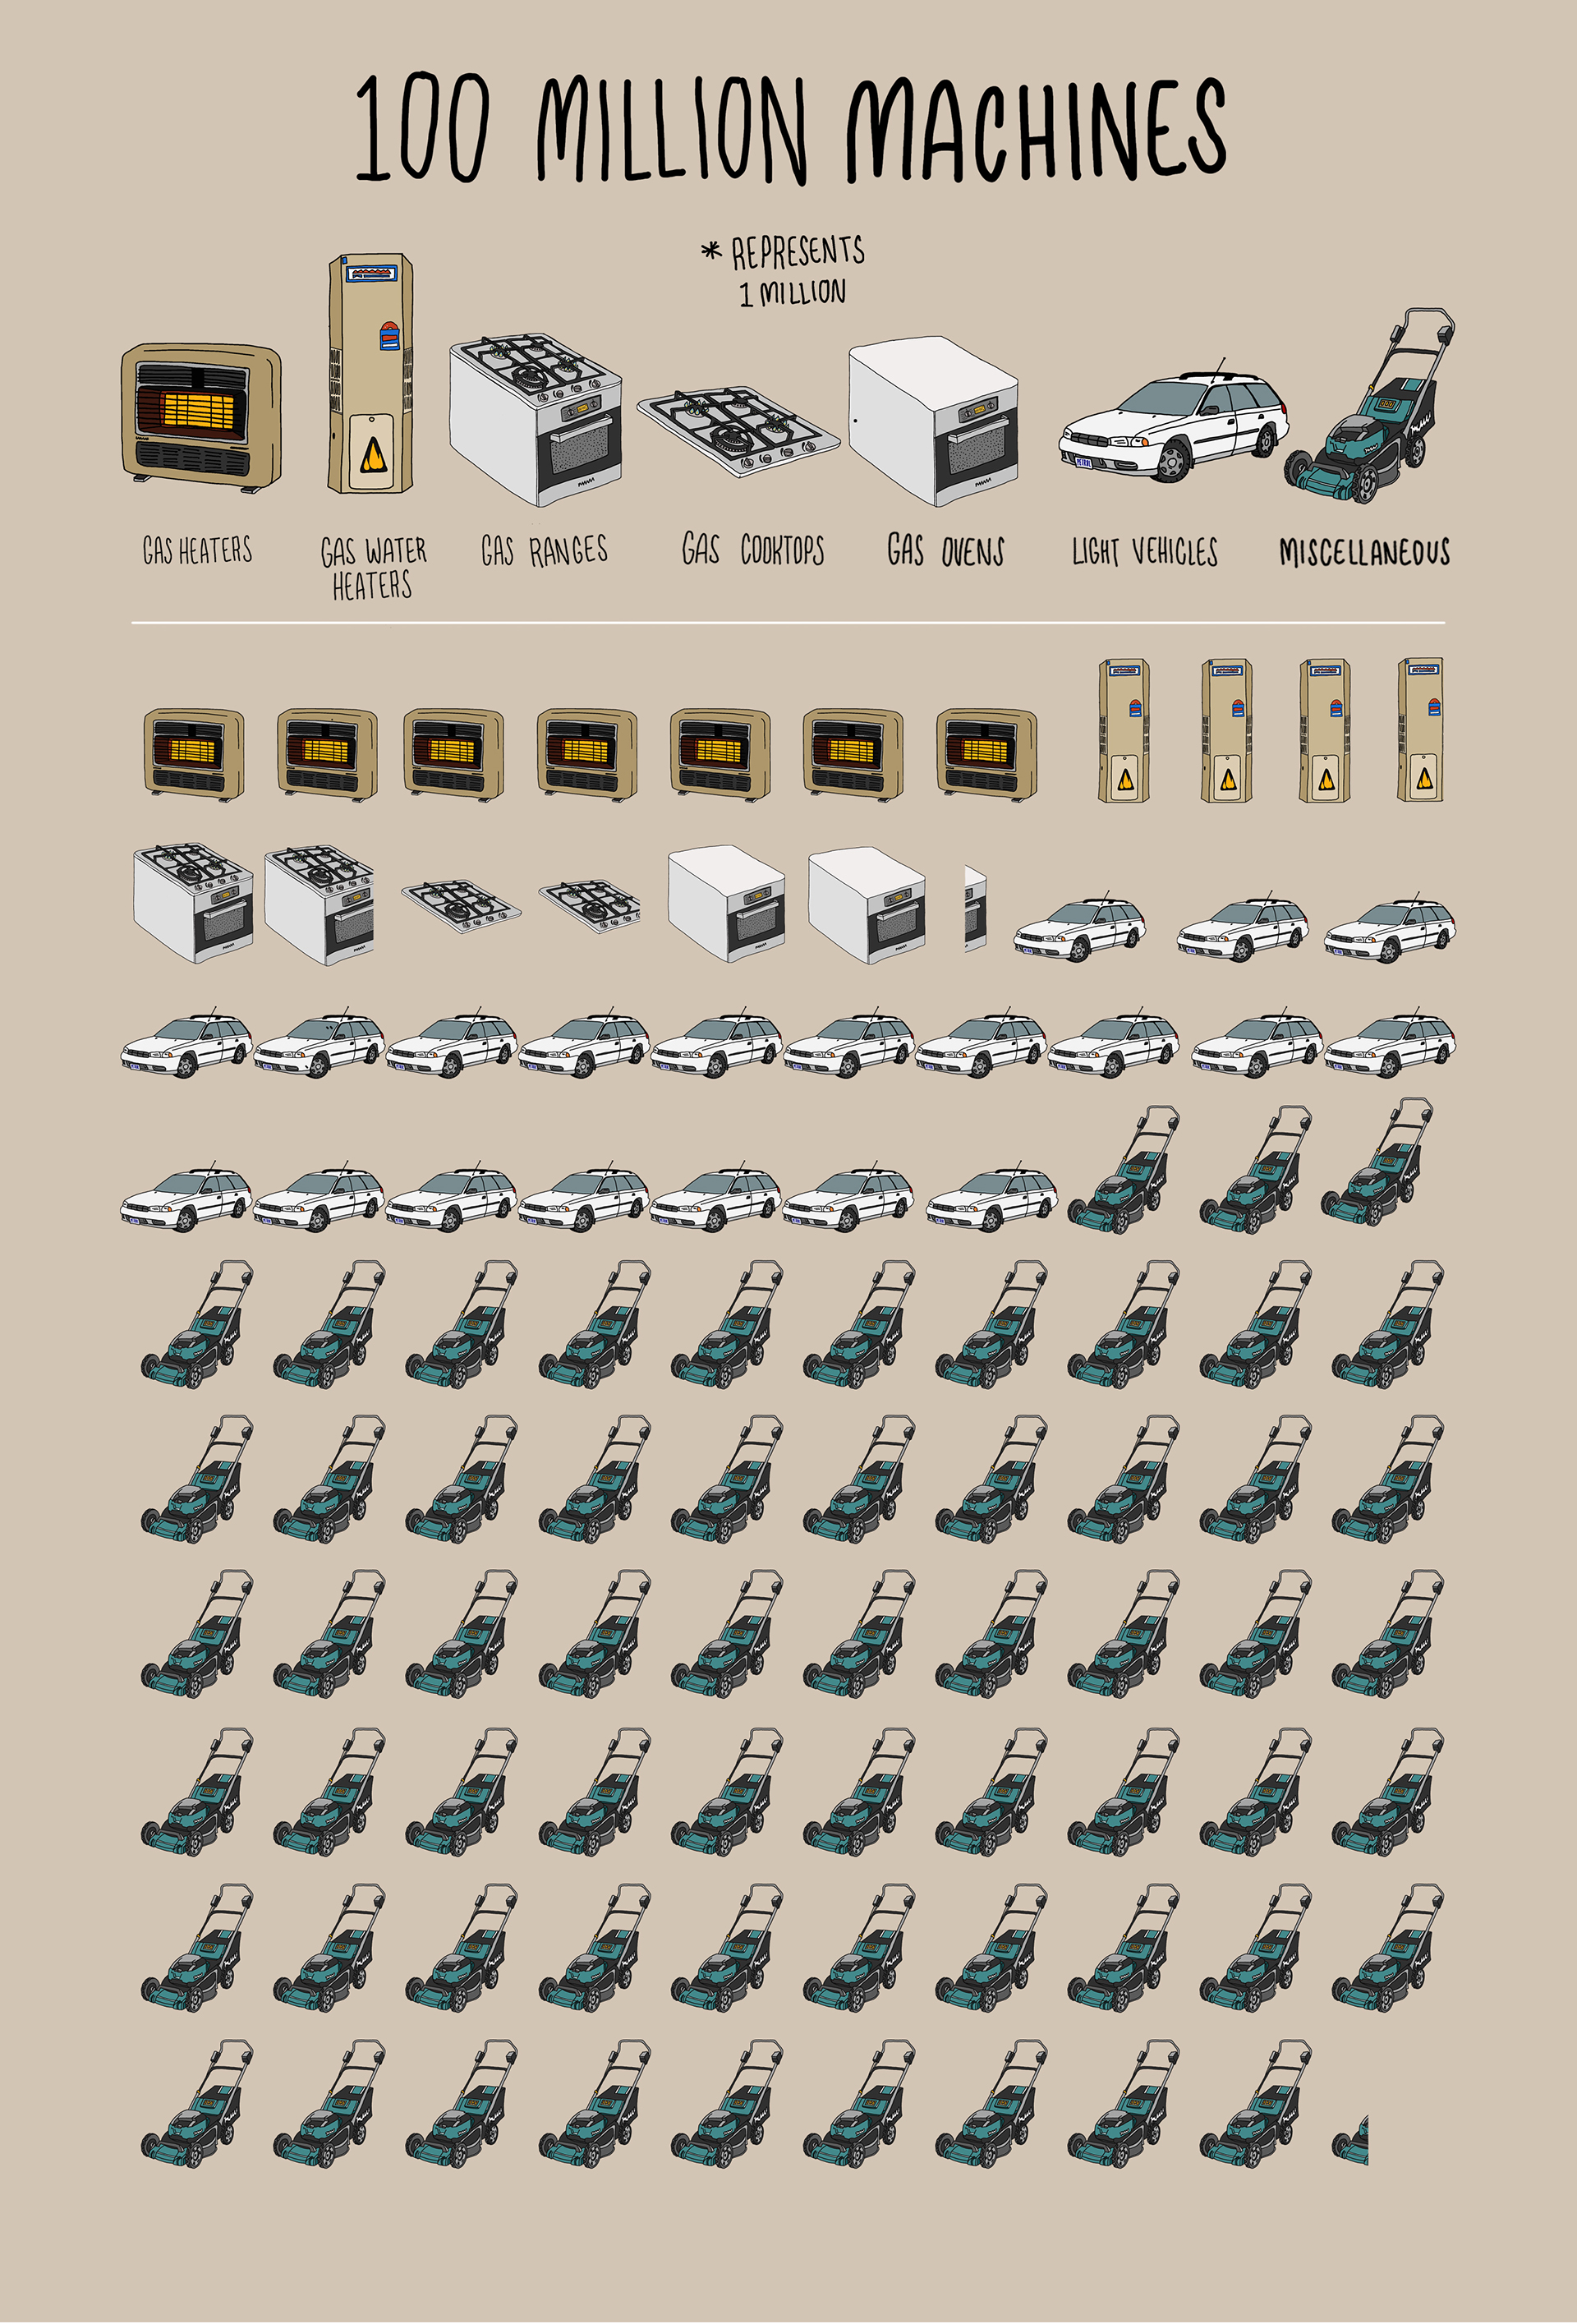 A grid showing gas water systems, cars, gas cooktops and ovens make up a large number of machines